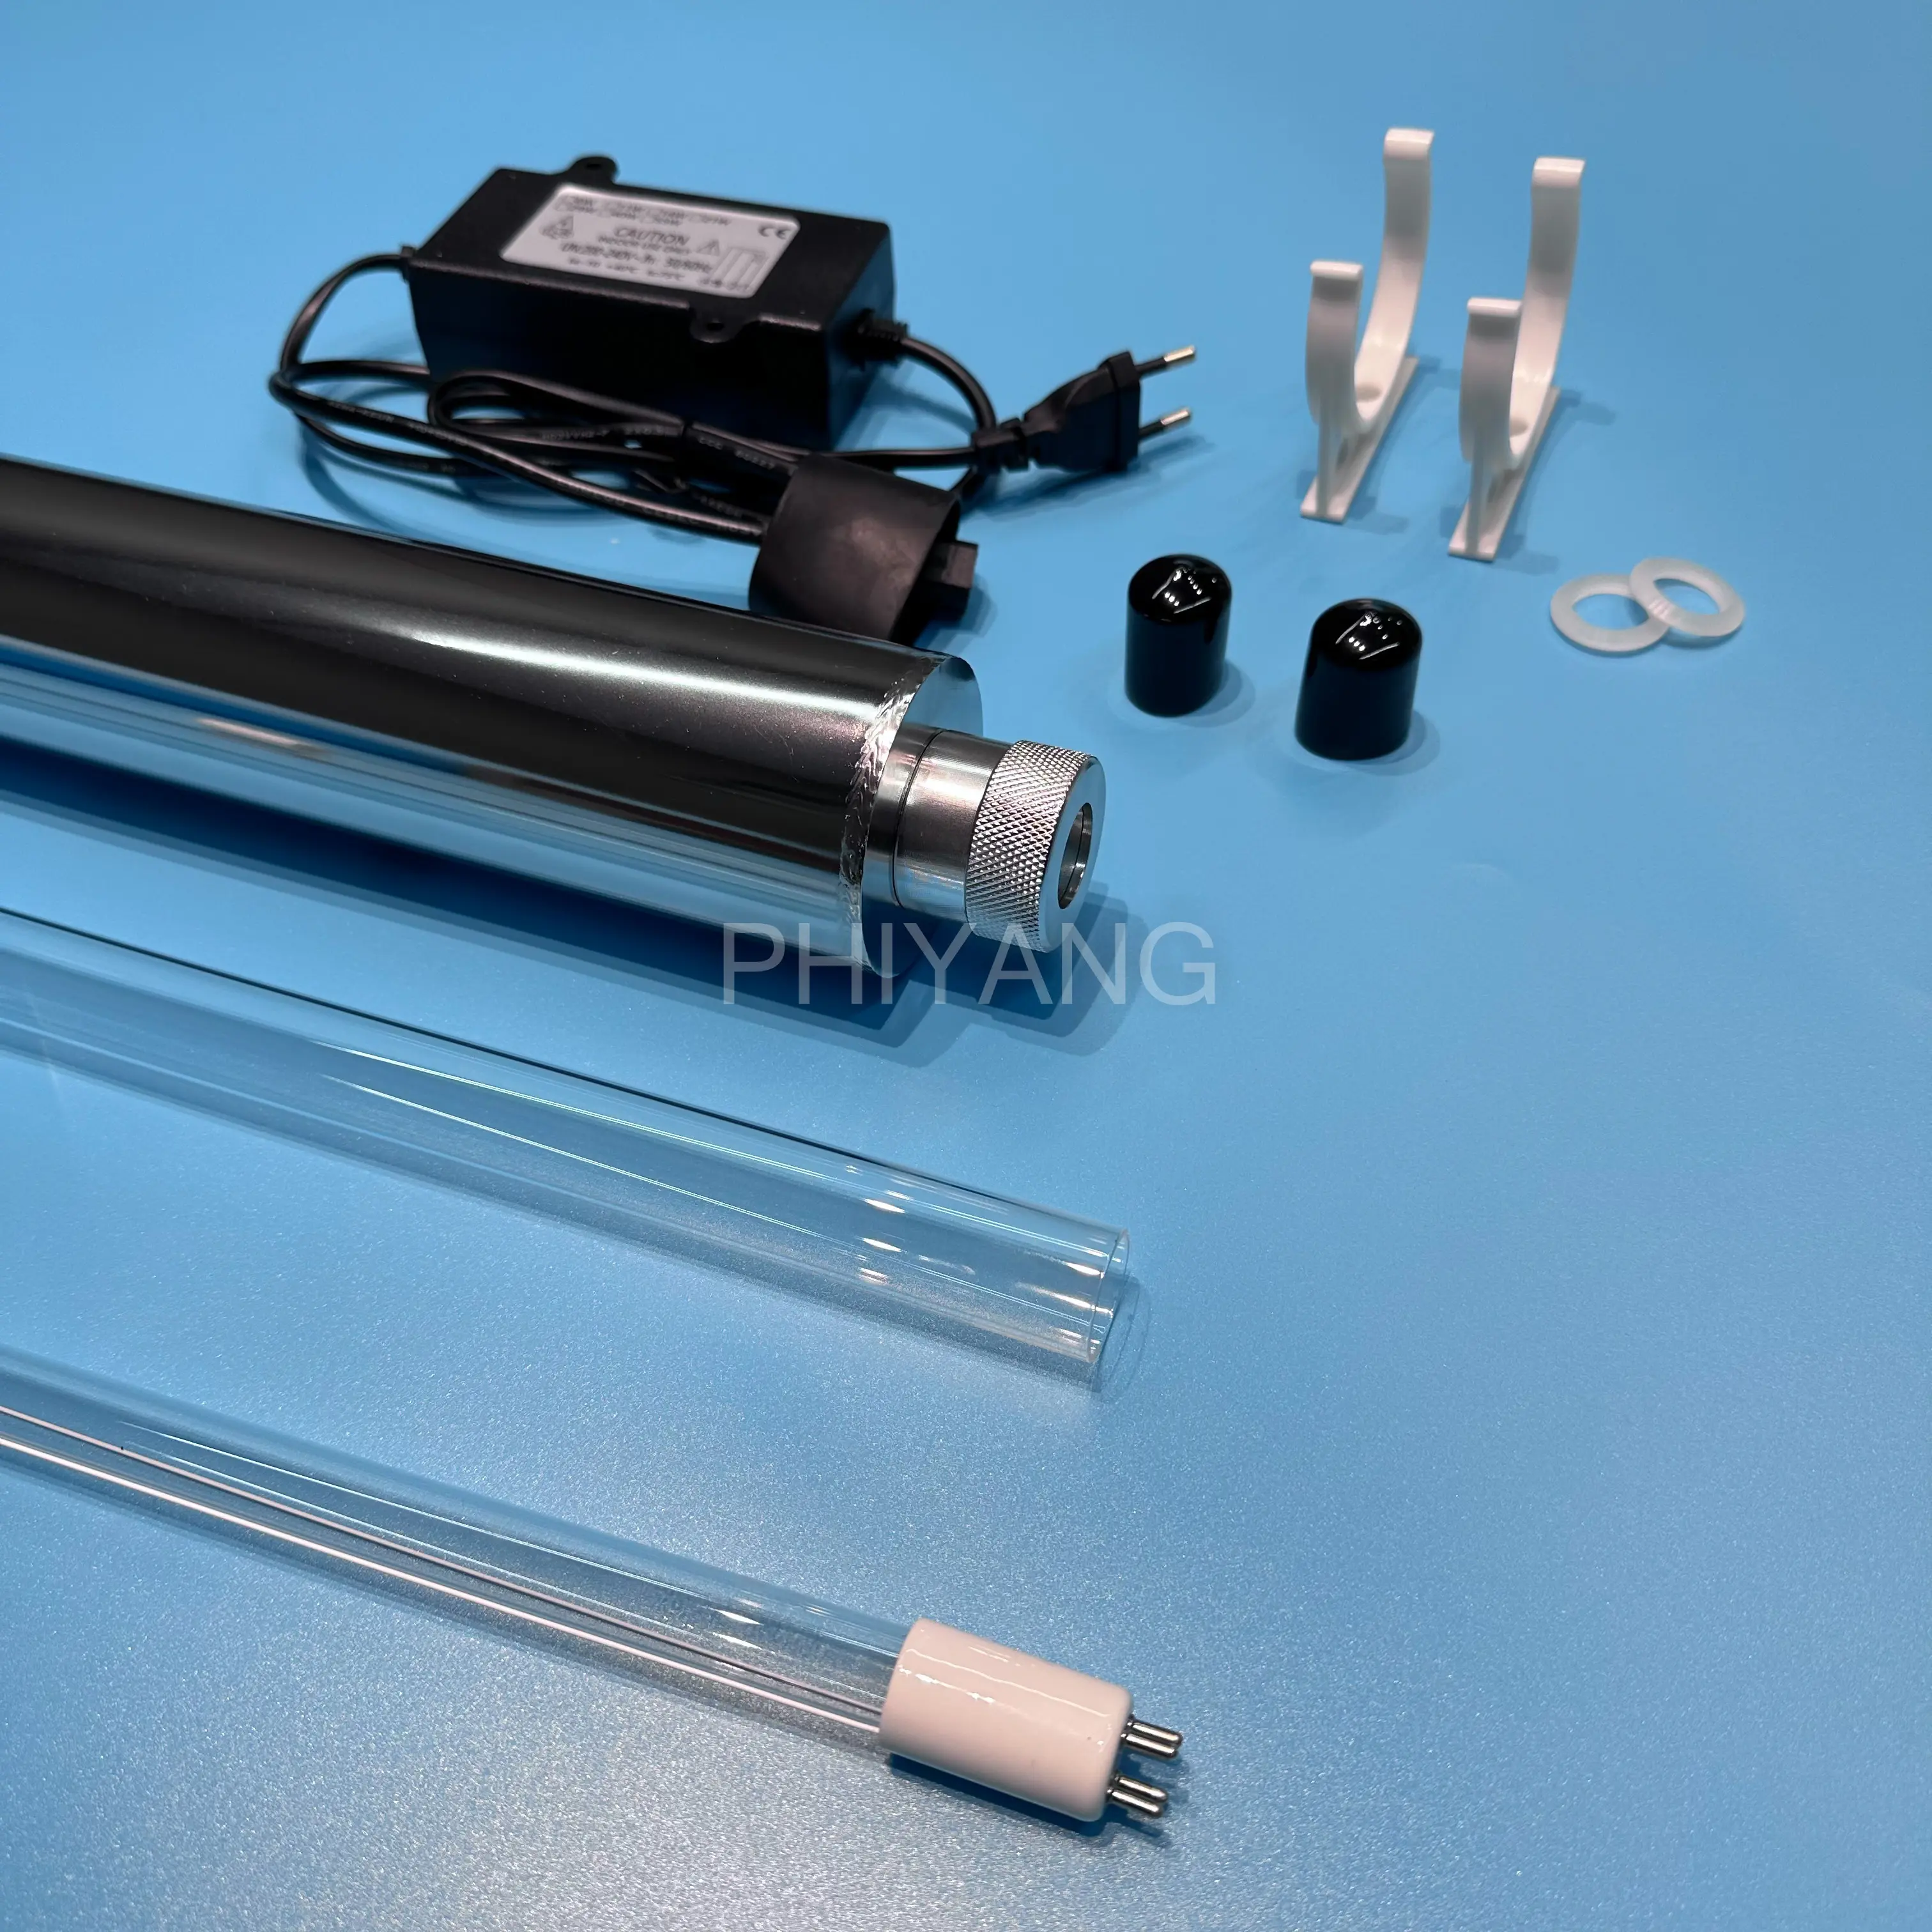 uv water steril 55W Ultraviolet Disinfection lamp UV Water Purifiers 12GPM UV Lamp/Quartz Sleeve Included